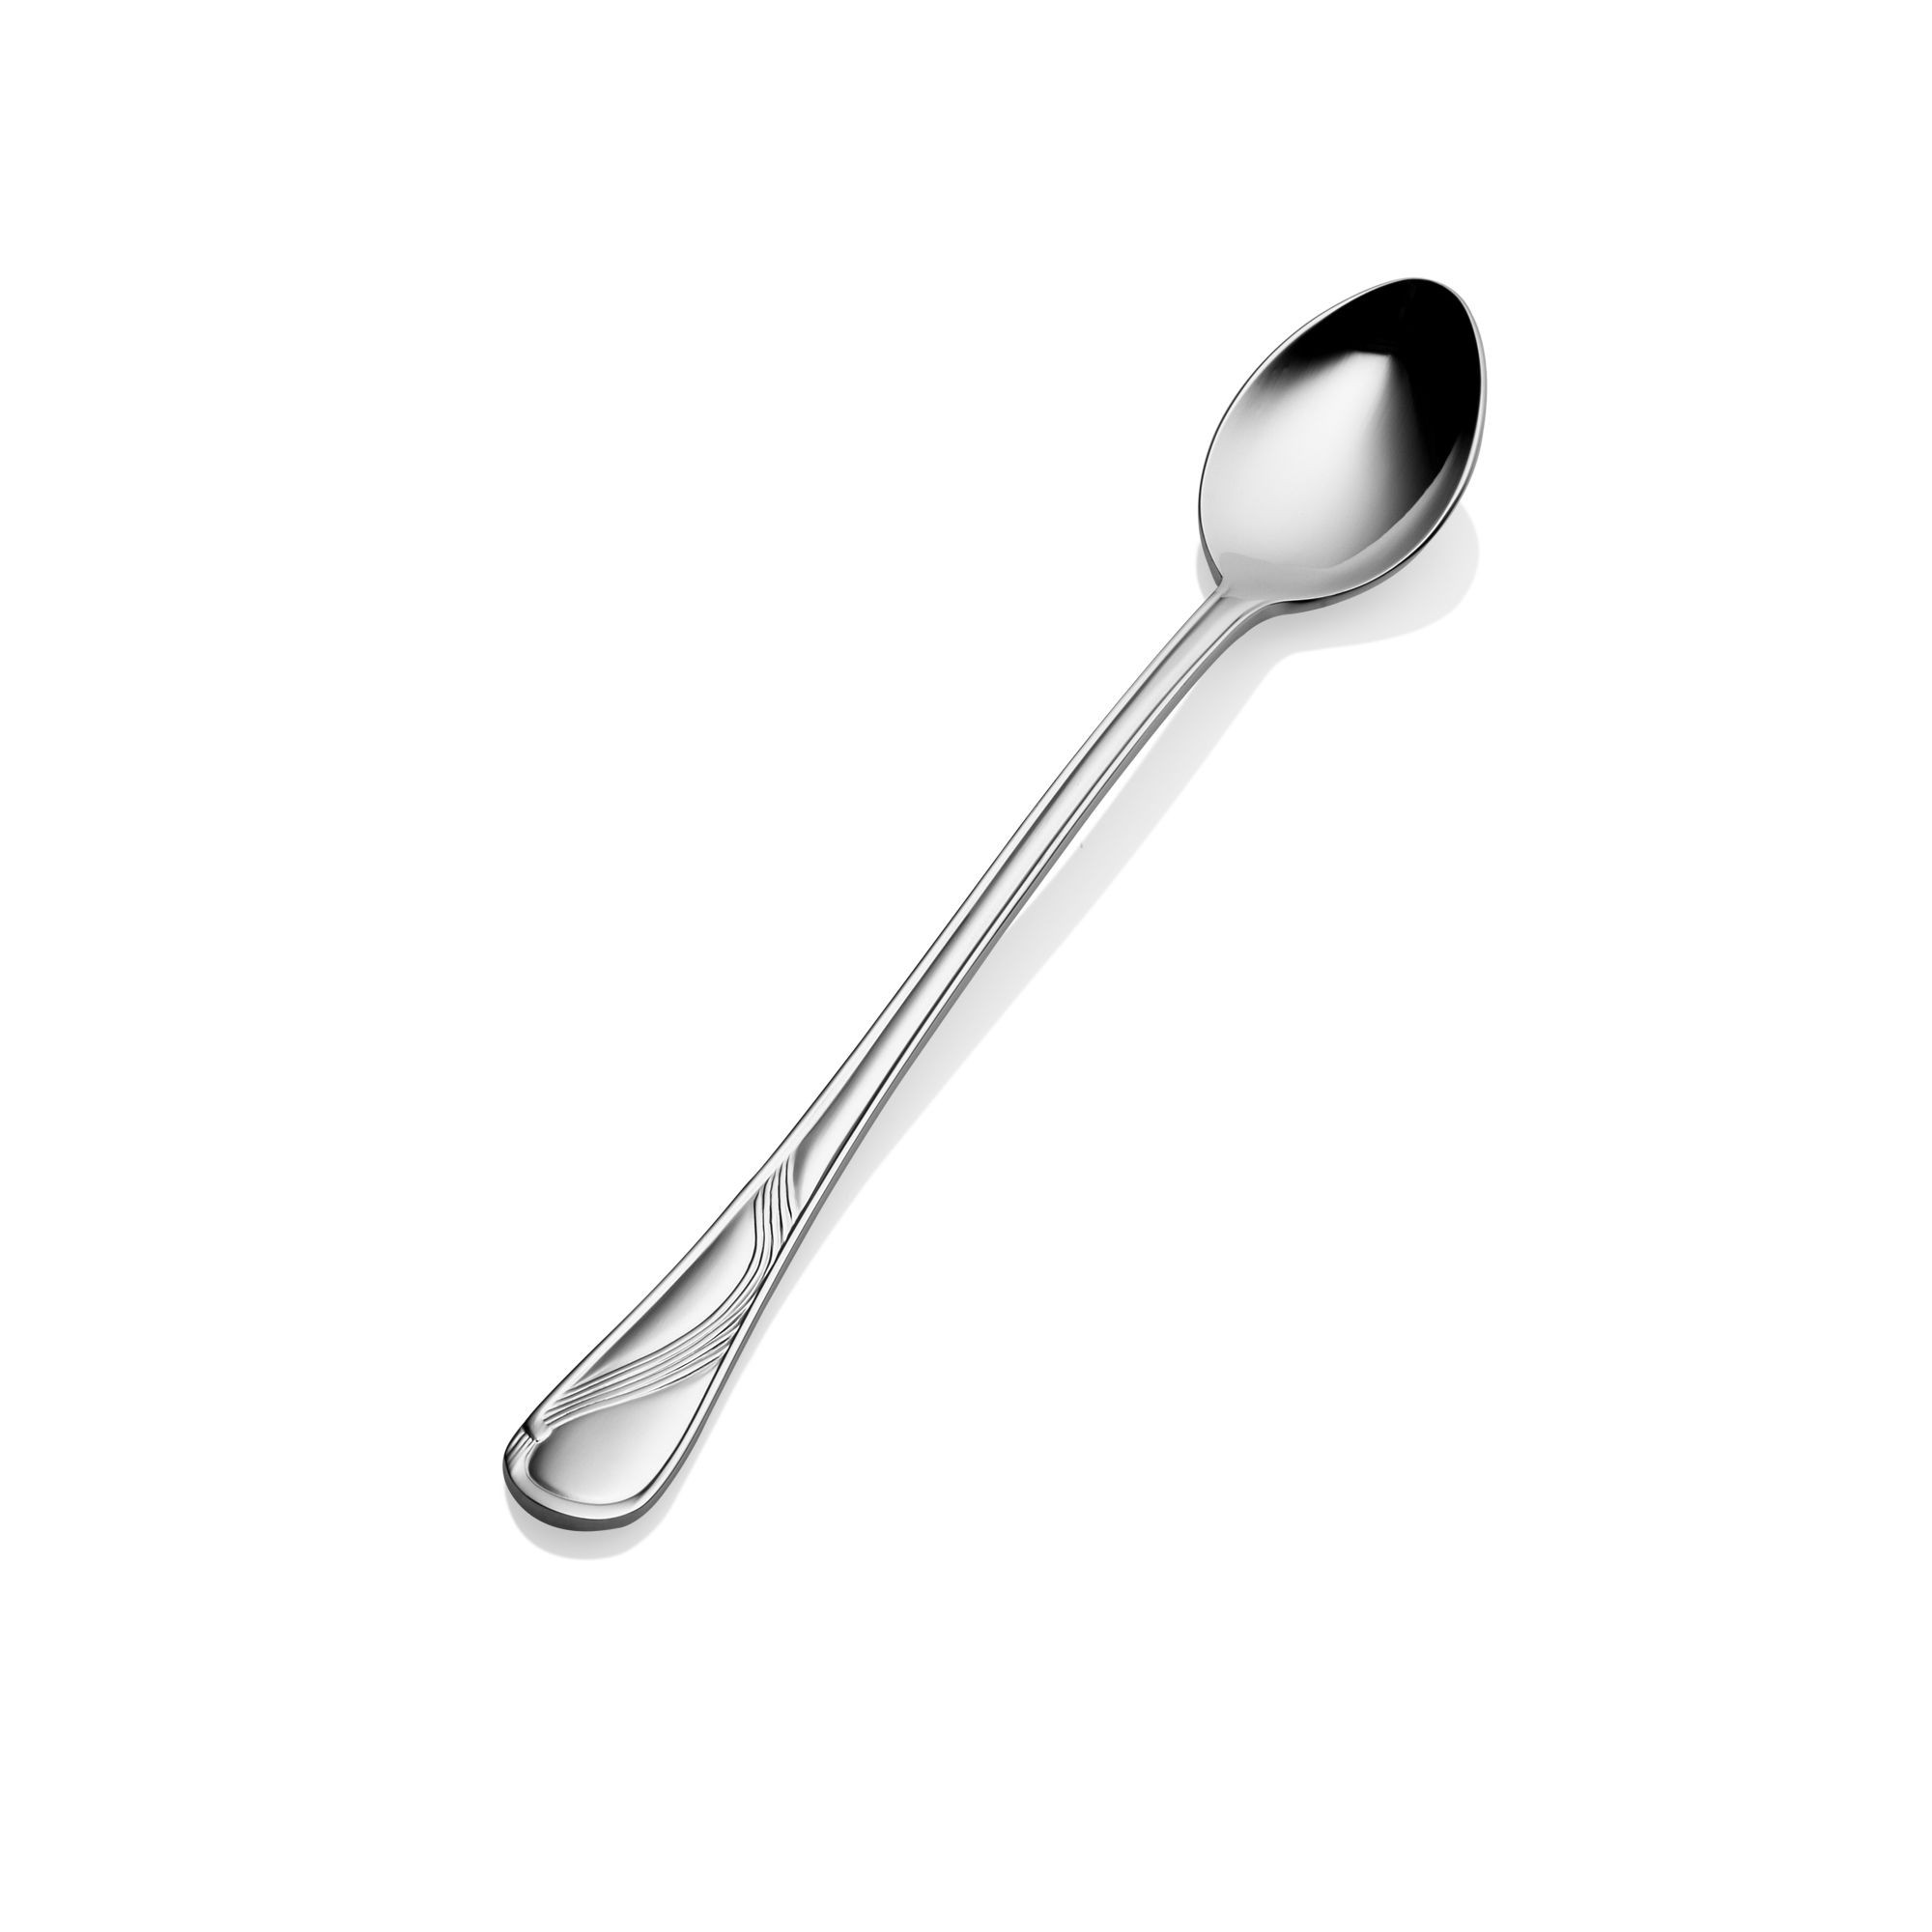 Bon Chef S2202 Wave 18/8 Stainless Steel Iced Tea Spoon